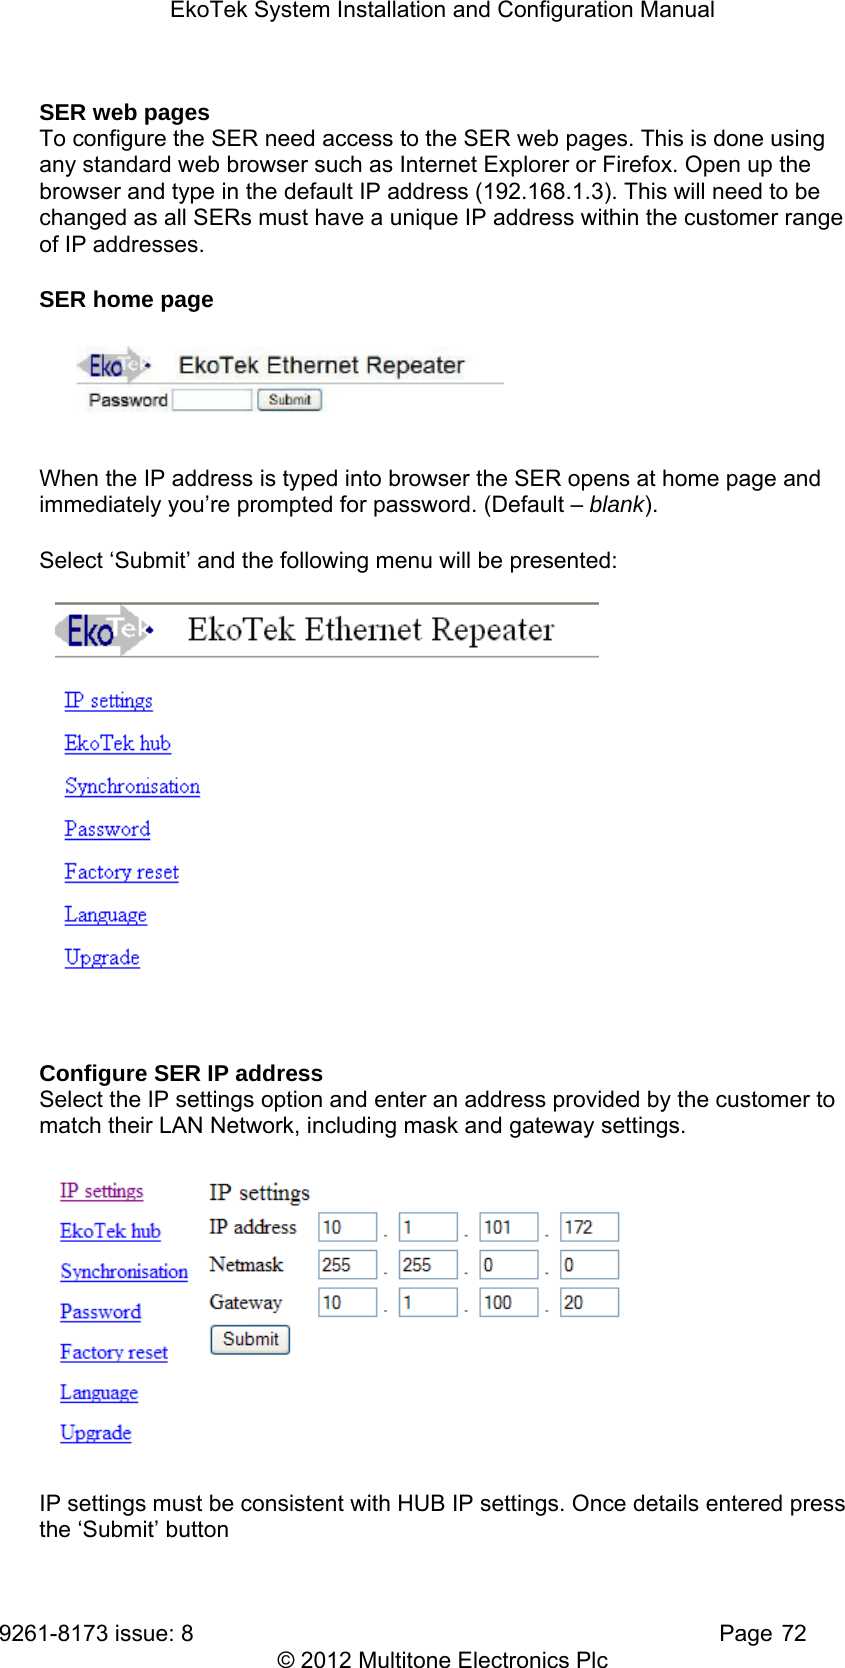 EkoTek System Installation and Configuration Manual 9261-8173 issue: 8   Page 72 © 2012 Multitone Electronics Plc SER web pages To configure the SER need access to the SER web pages. This is done using any standard web browser such as Internet Explorer or Firefox. Open up the browser and type in the default IP address (192.168.1.3). This will need to be changed as all SERs must have a unique IP address within the customer range of IP addresses. SER home page  When the IP address is typed into browser the SER opens at home page and immediately you’re prompted for password. (Default – blank).  Select ‘Submit’ and the following menu will be presented:   Configure SER IP address Select the IP settings option and enter an address provided by the customer to match their LAN Network, including mask and gateway settings.   IP settings must be consistent with HUB IP settings. Once details entered press the ‘Submit’ button 